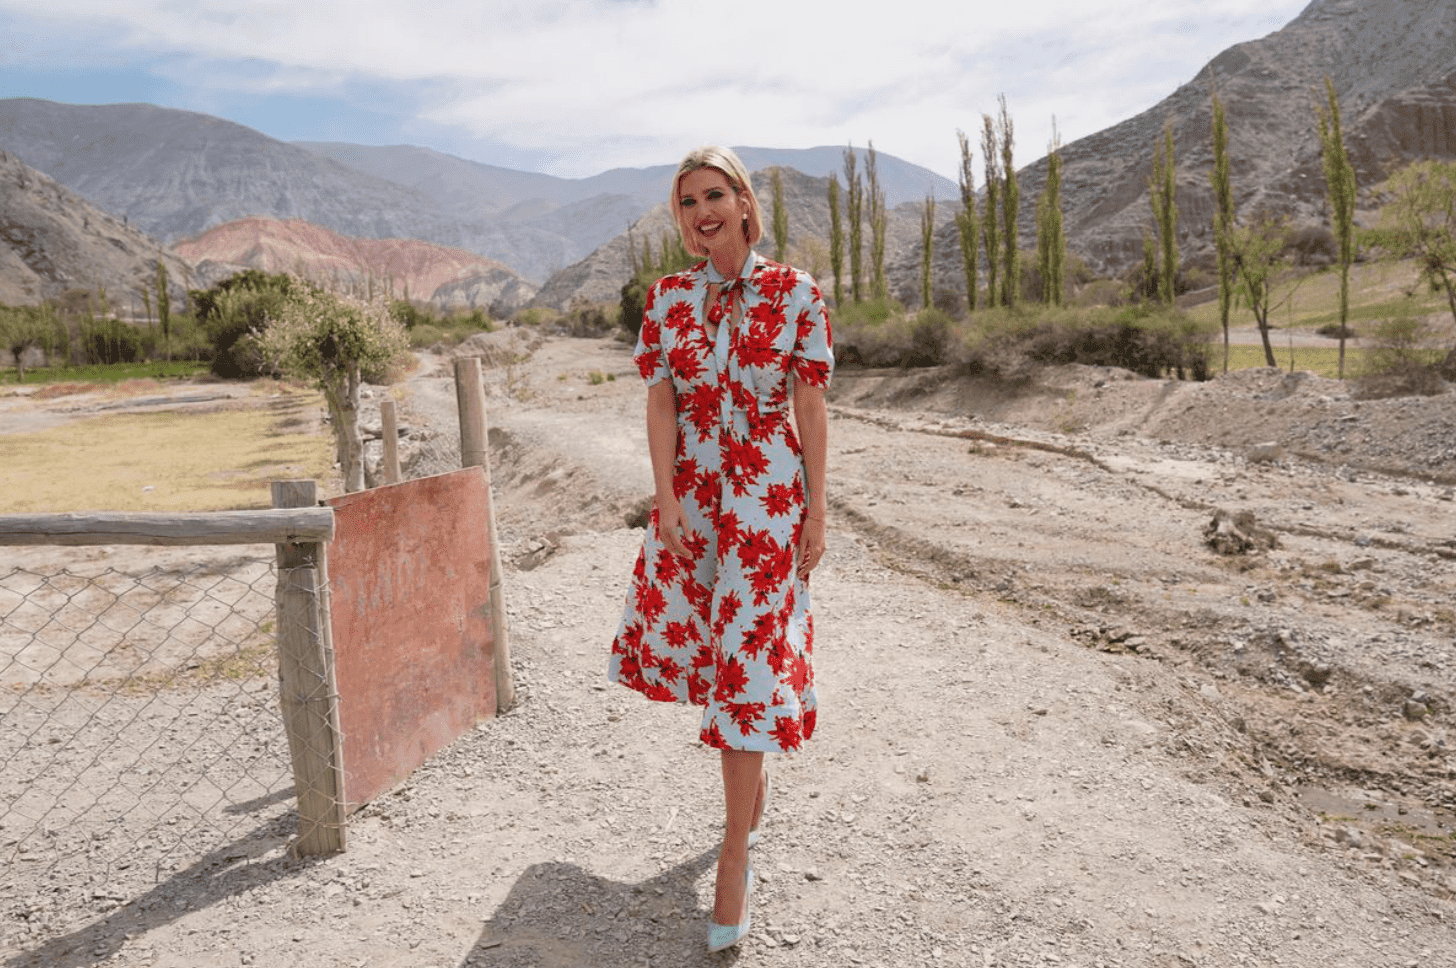 Ivanka Trump takes a a stroll during her Latin American tour, below the Mountain of Seven Colors on September 5, 2019, in Purmamarca, Argentina | Source: Reuters/ Kevin Lamarque